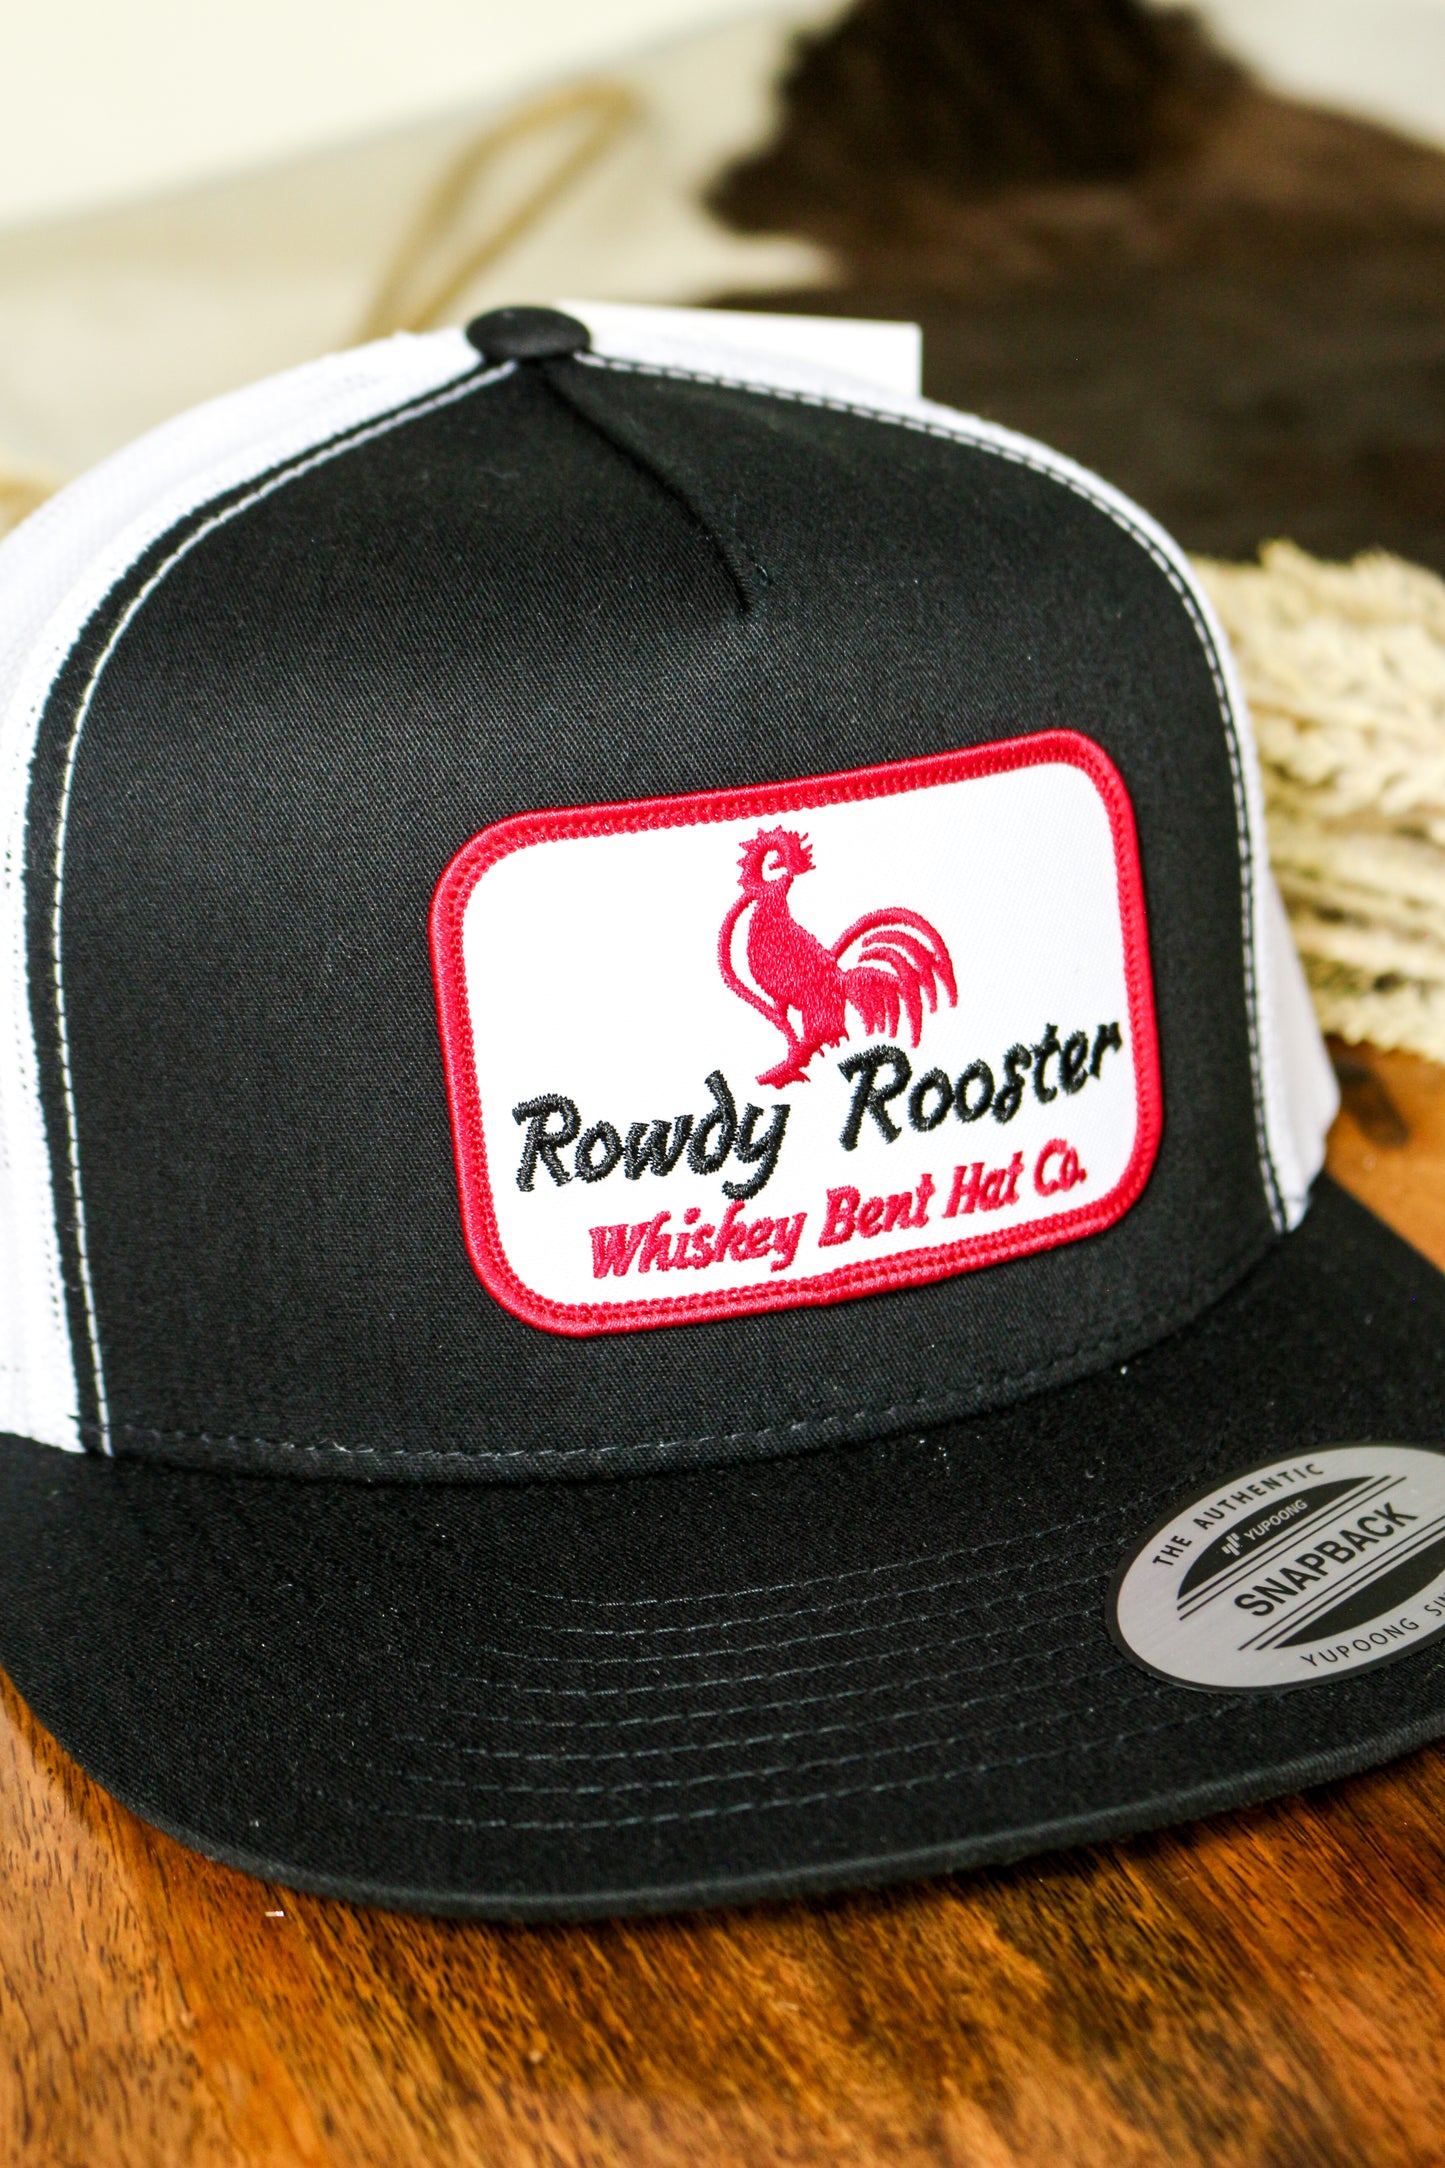 Rowdy Rooster Black & White Cap